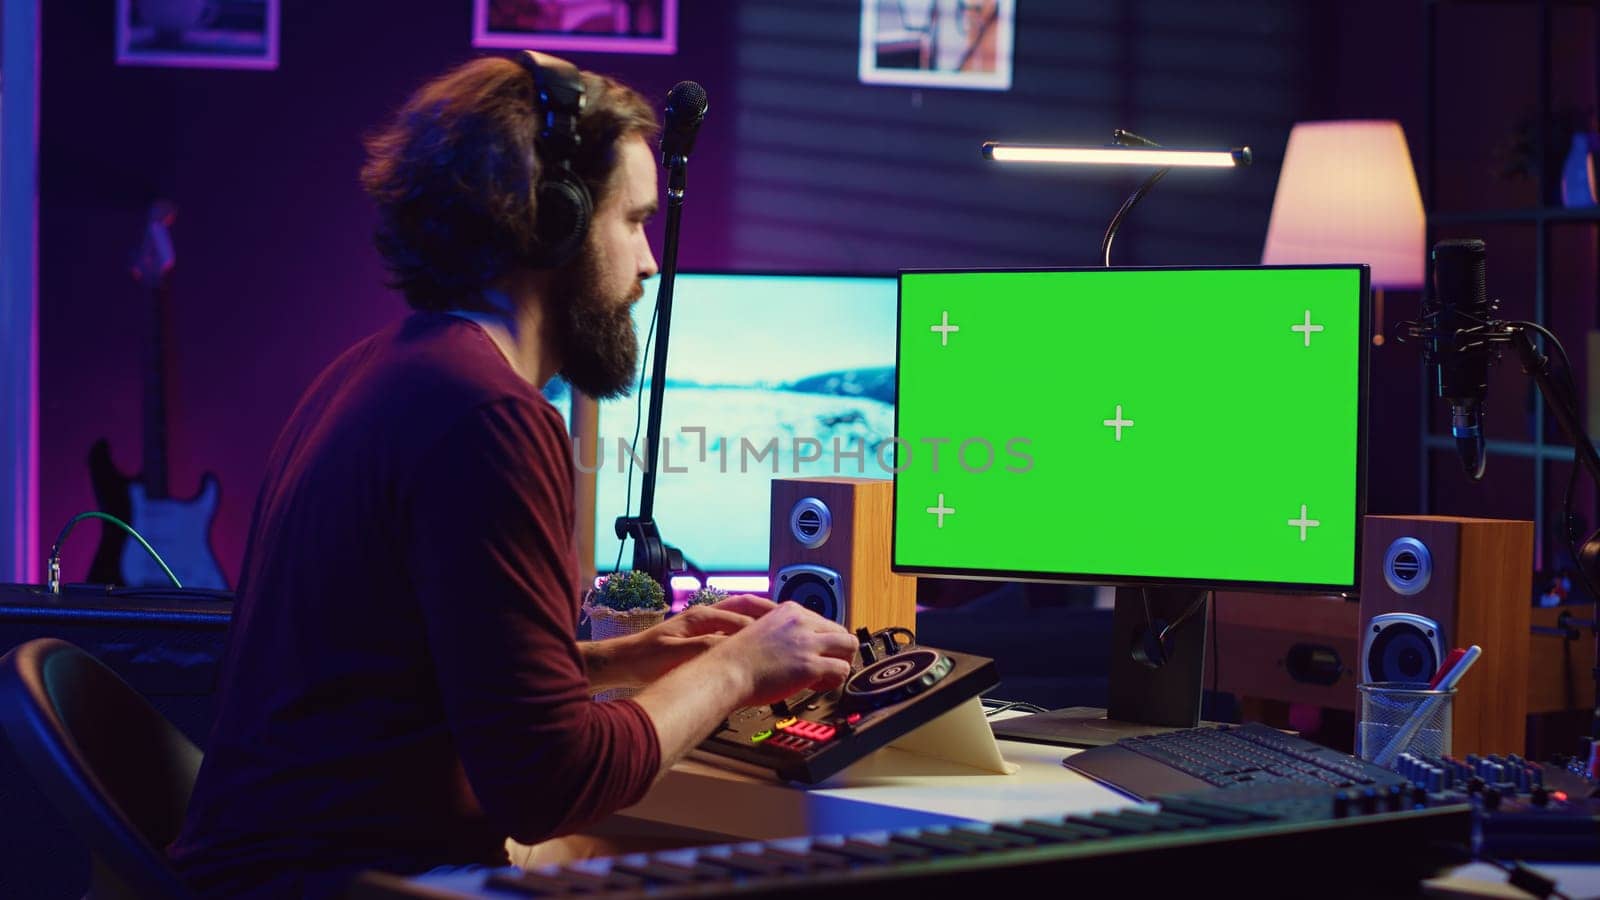 Music producer learning to use mixing console with online tutorial on computer, looking at isolated greenscreen display. Sound engineer practices editing sounds in his home studio. Camera A.